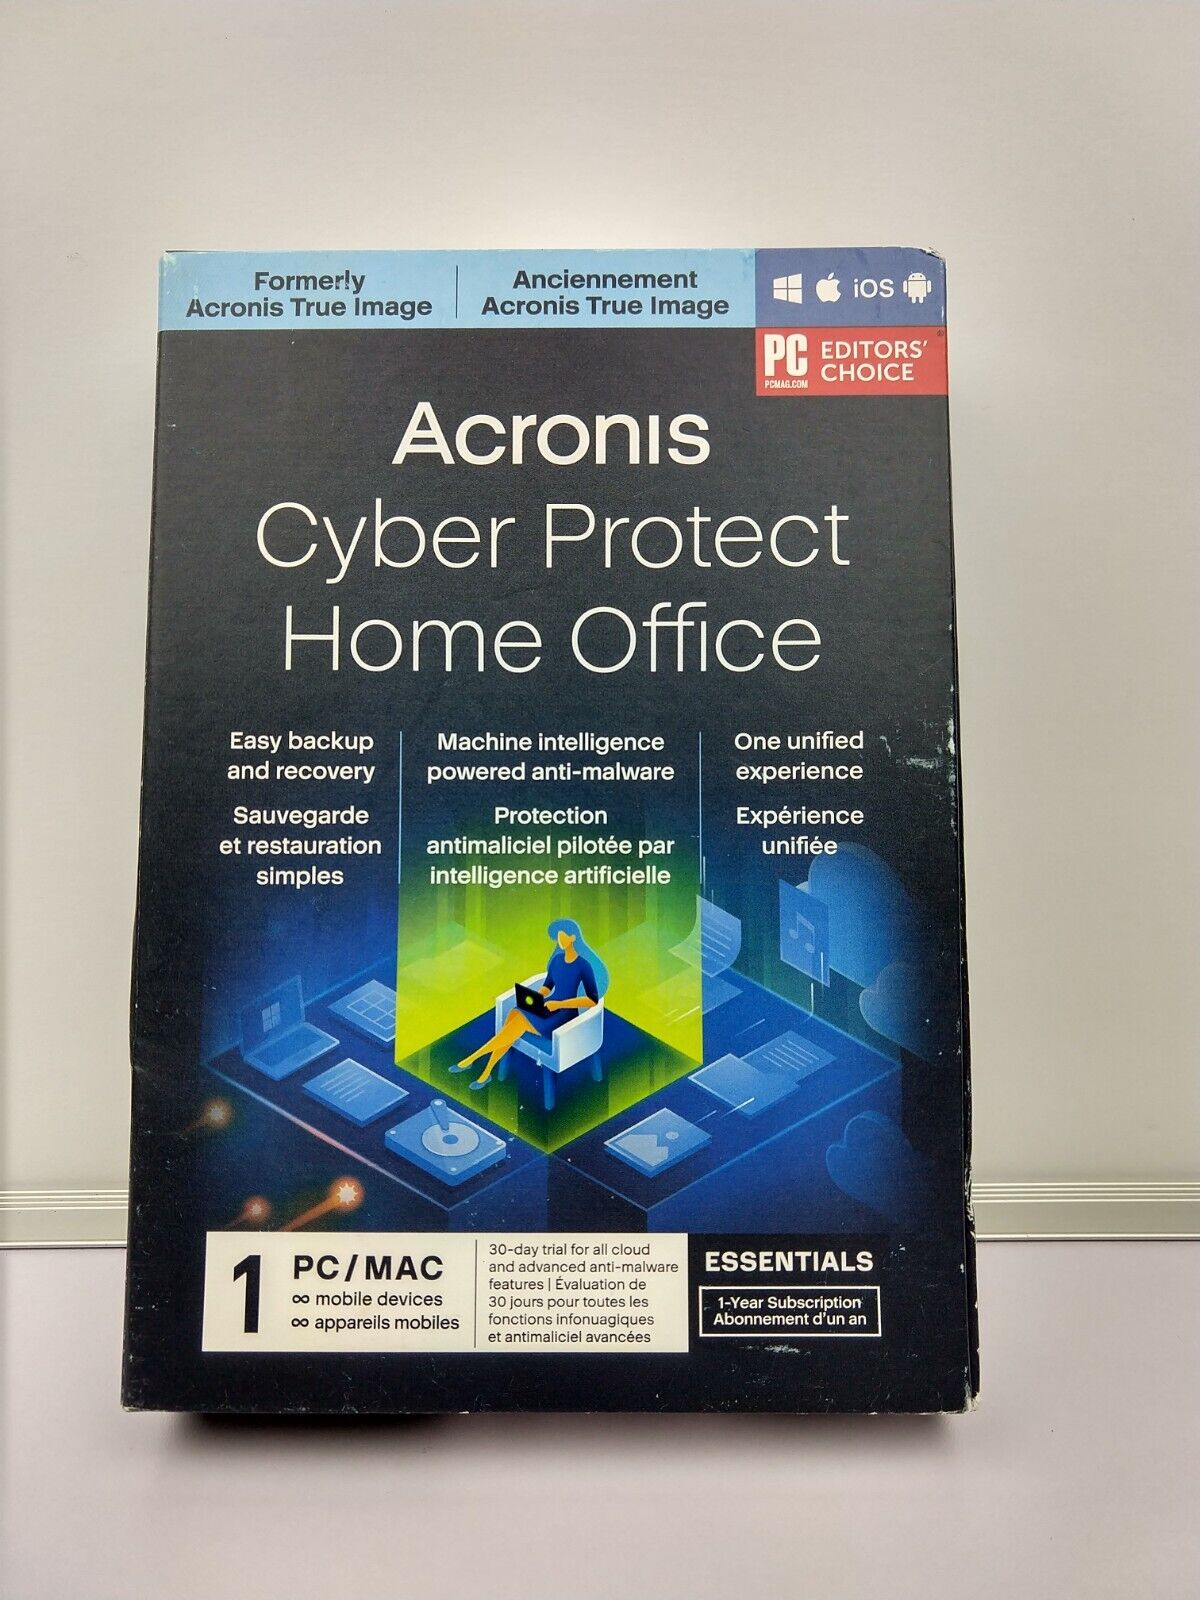 Acronis Cyber Protect Home Office (Formerly Acronis True Image) Editor's Choice